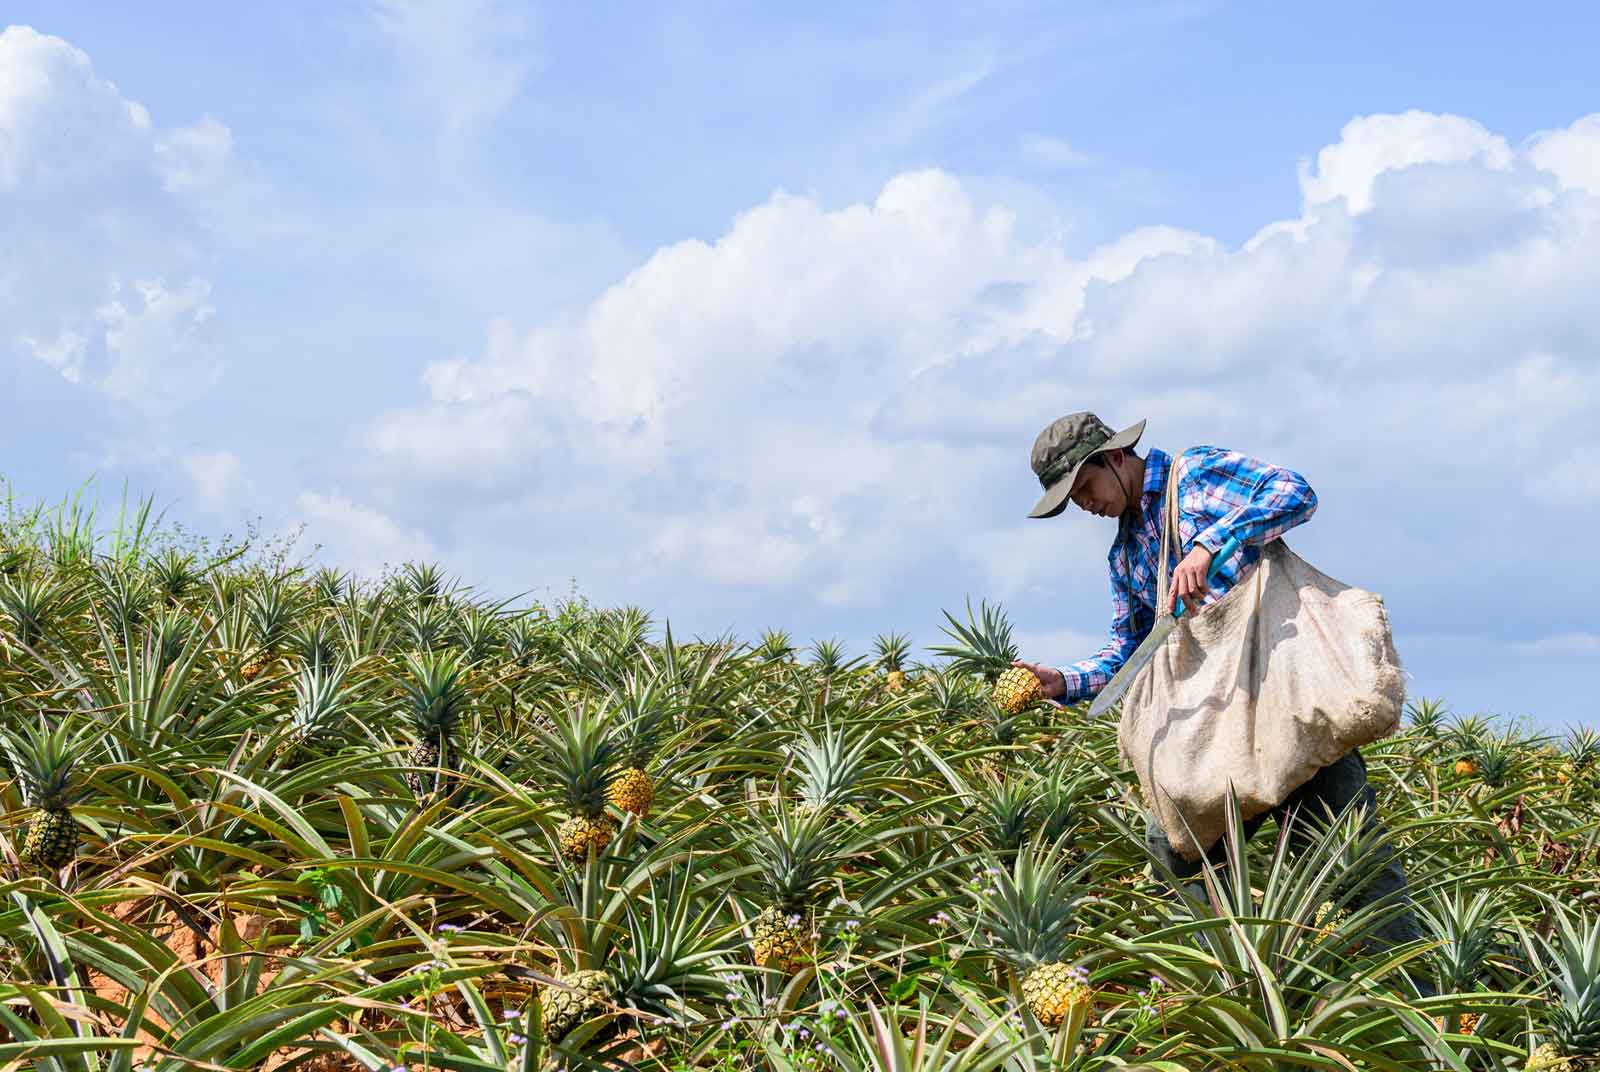 Video Report: The “Dark Heart” of Taiwan’s freedom pineapples